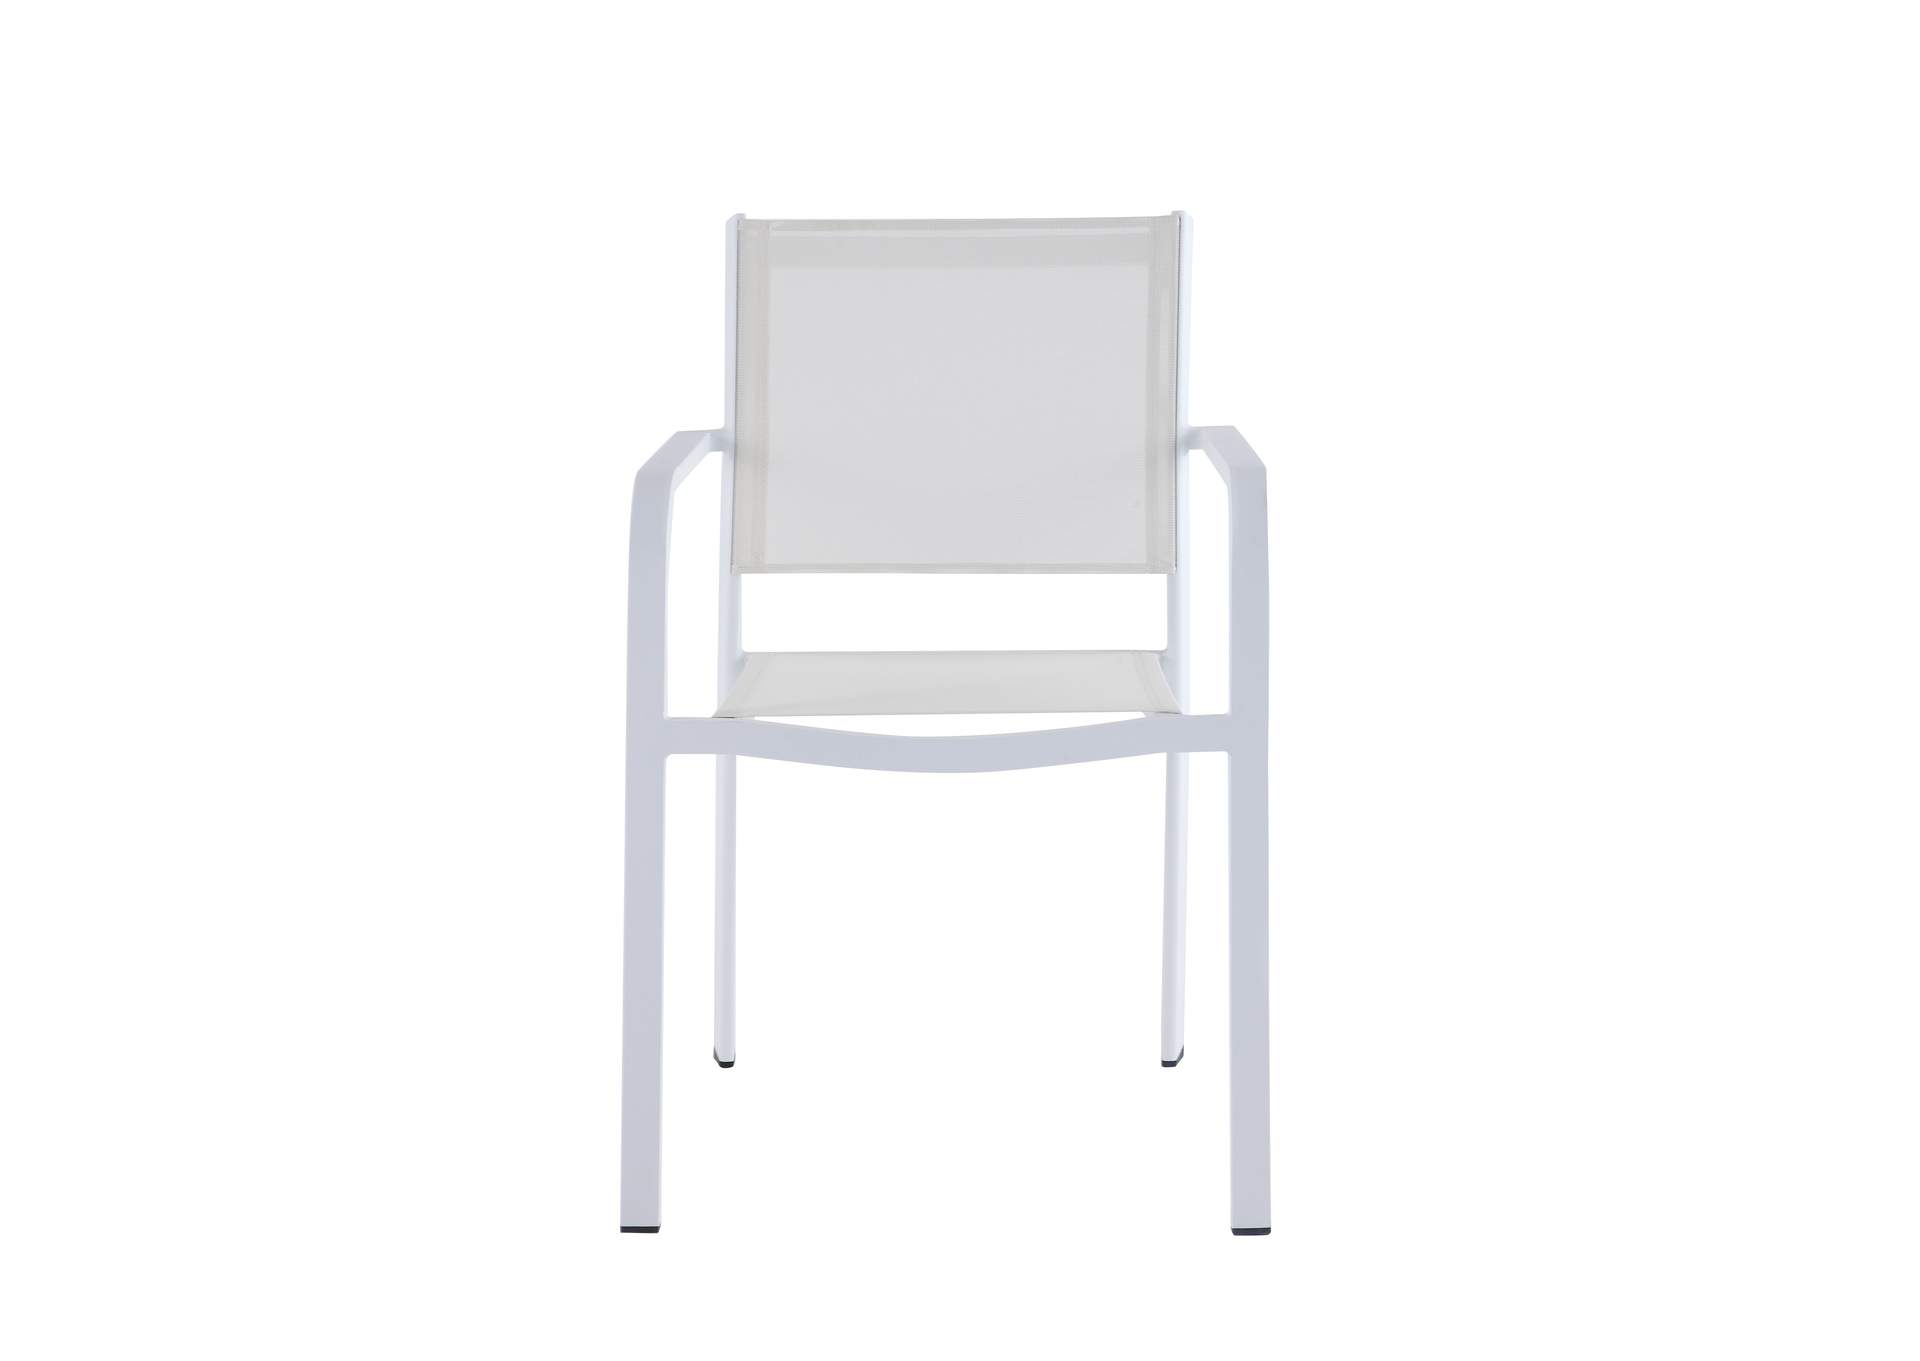 Contemporary Low Back Outdoor Chair with Sling Seat,Chintaly Imports